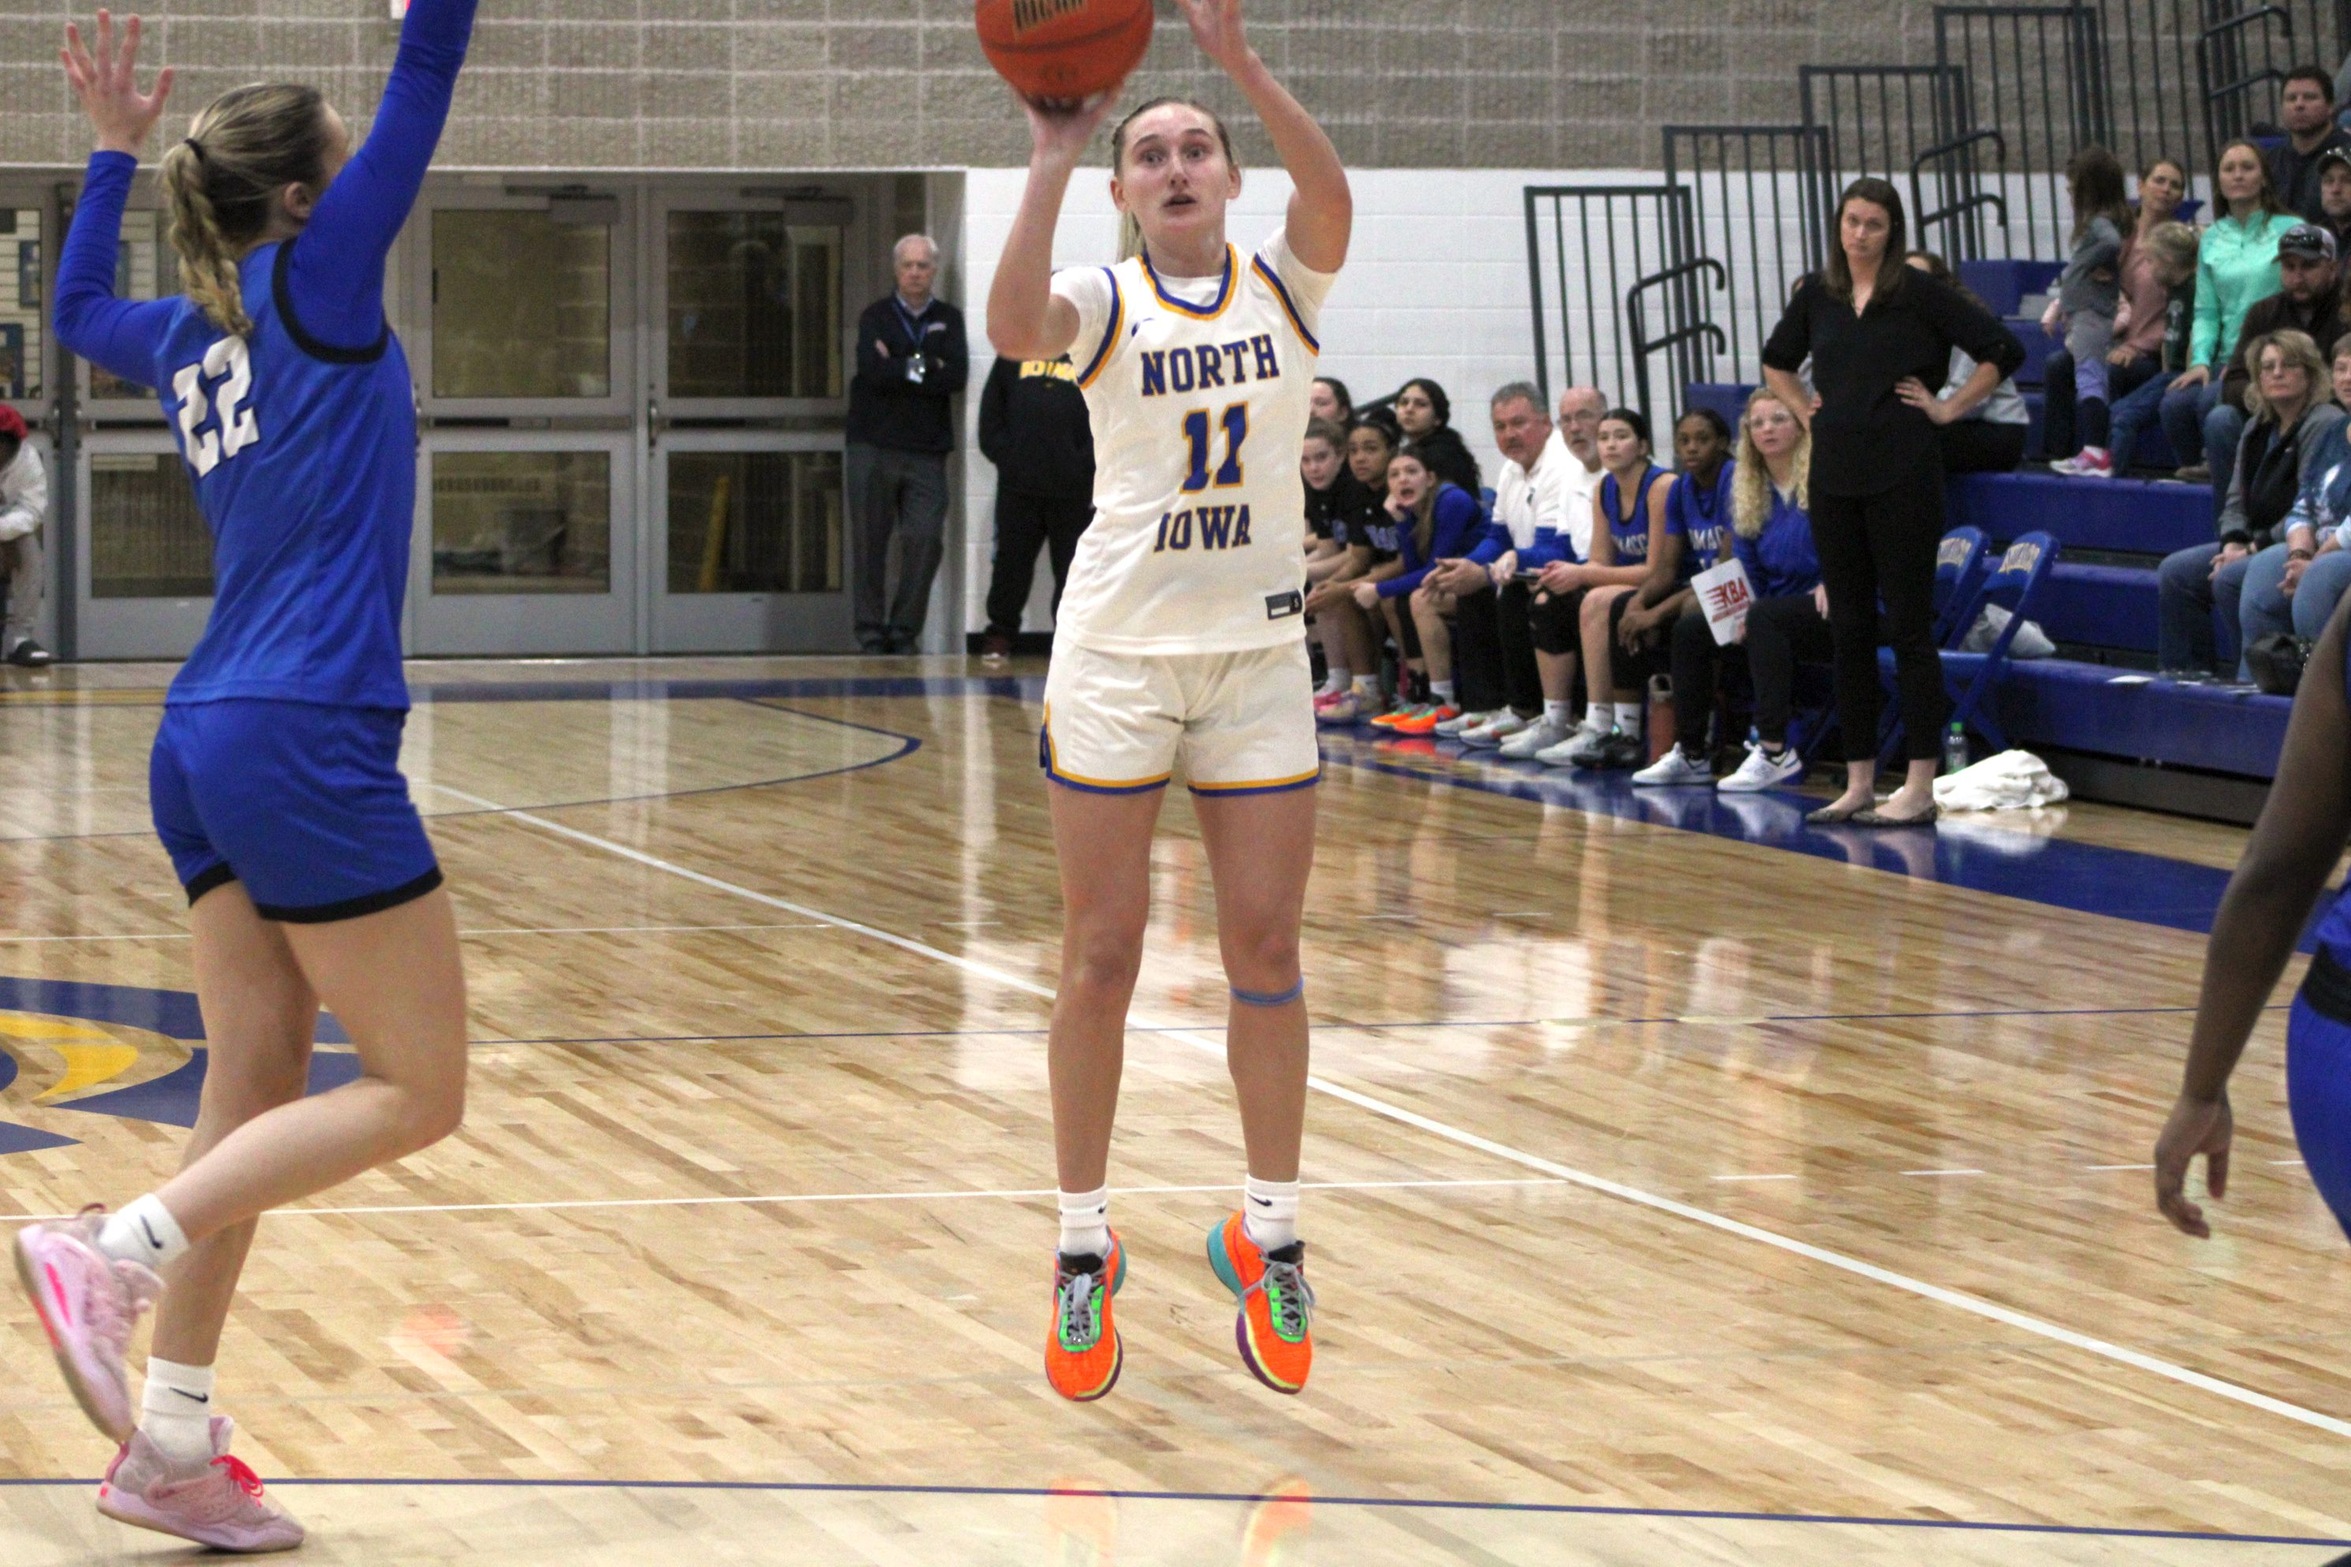 NIACC's Lilly Radcliffe knocks down a 3-point goal in Saturday's ICCAC contest against DMACC in the NIACC gym.